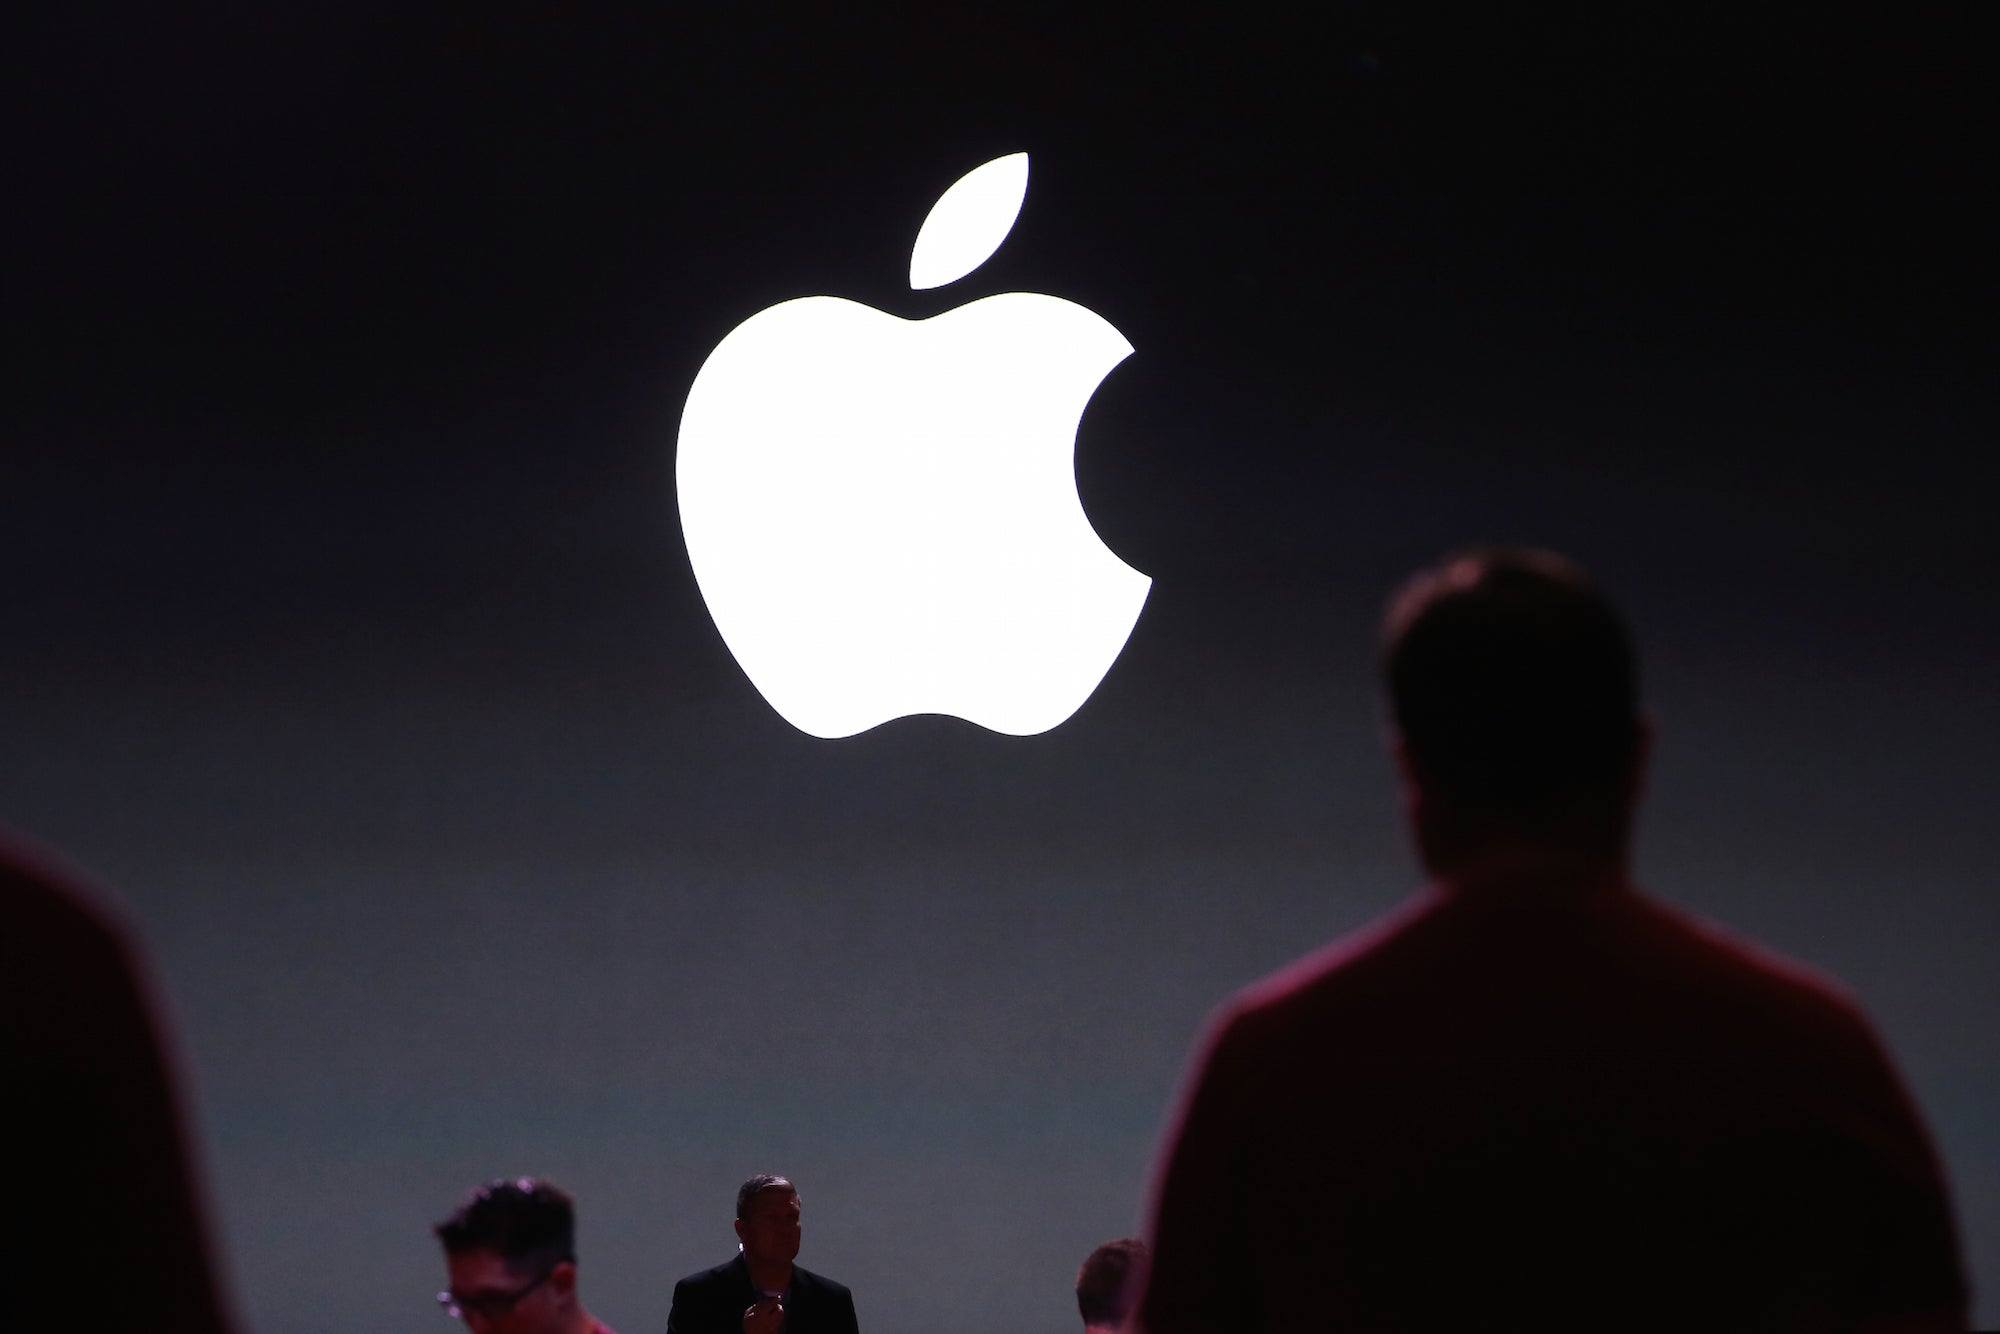 Apple’s board rejects diversity proposal as ‘unduly burdensome and not ...